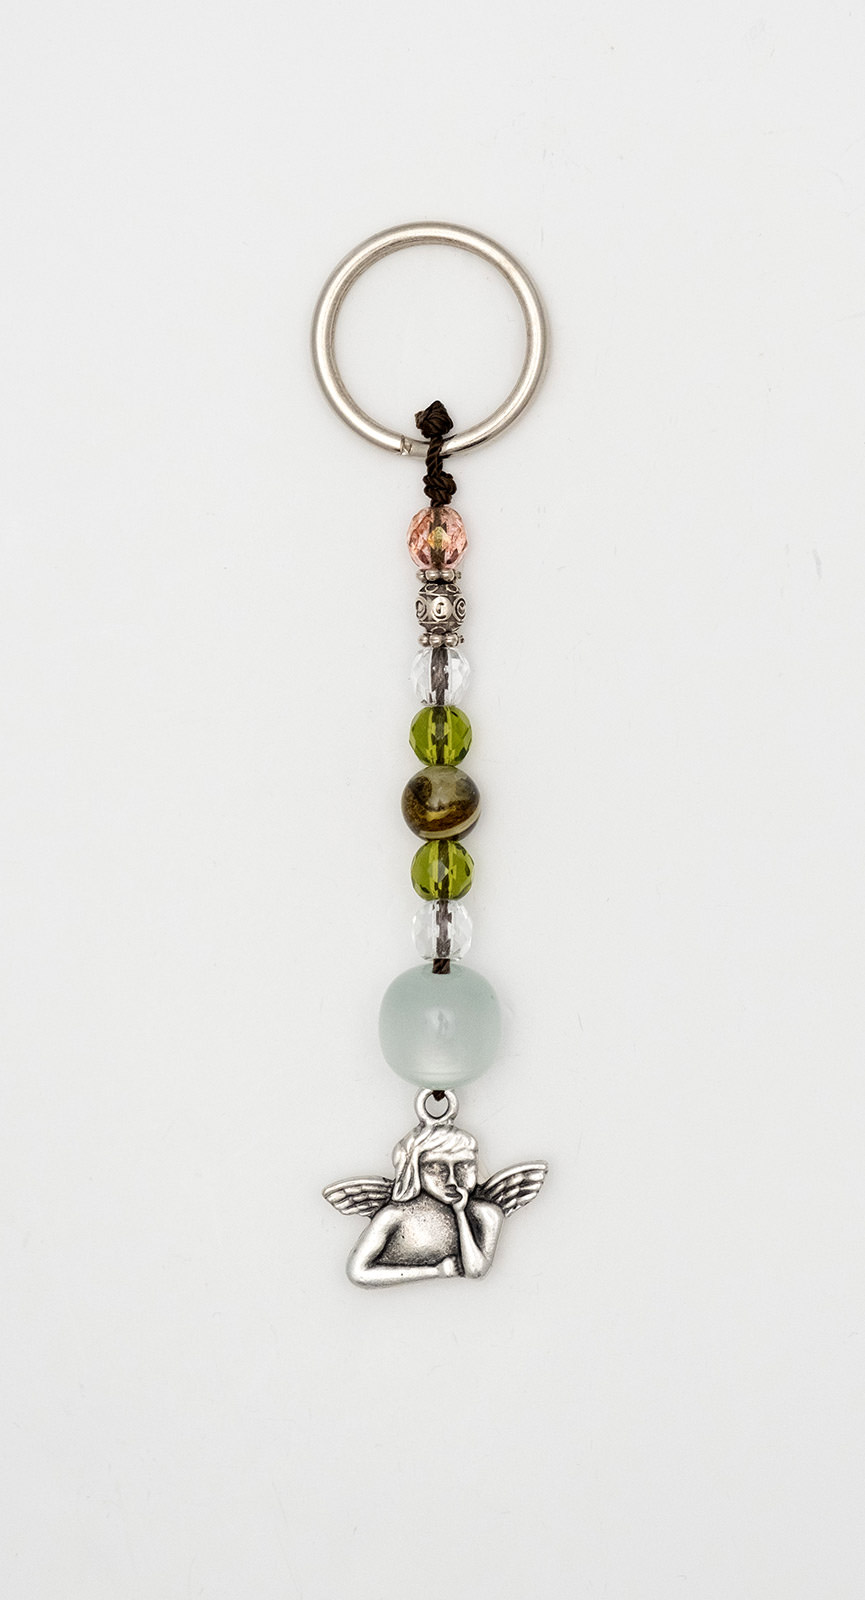 Keyring made of artificial resin and crystal with a Little Angel